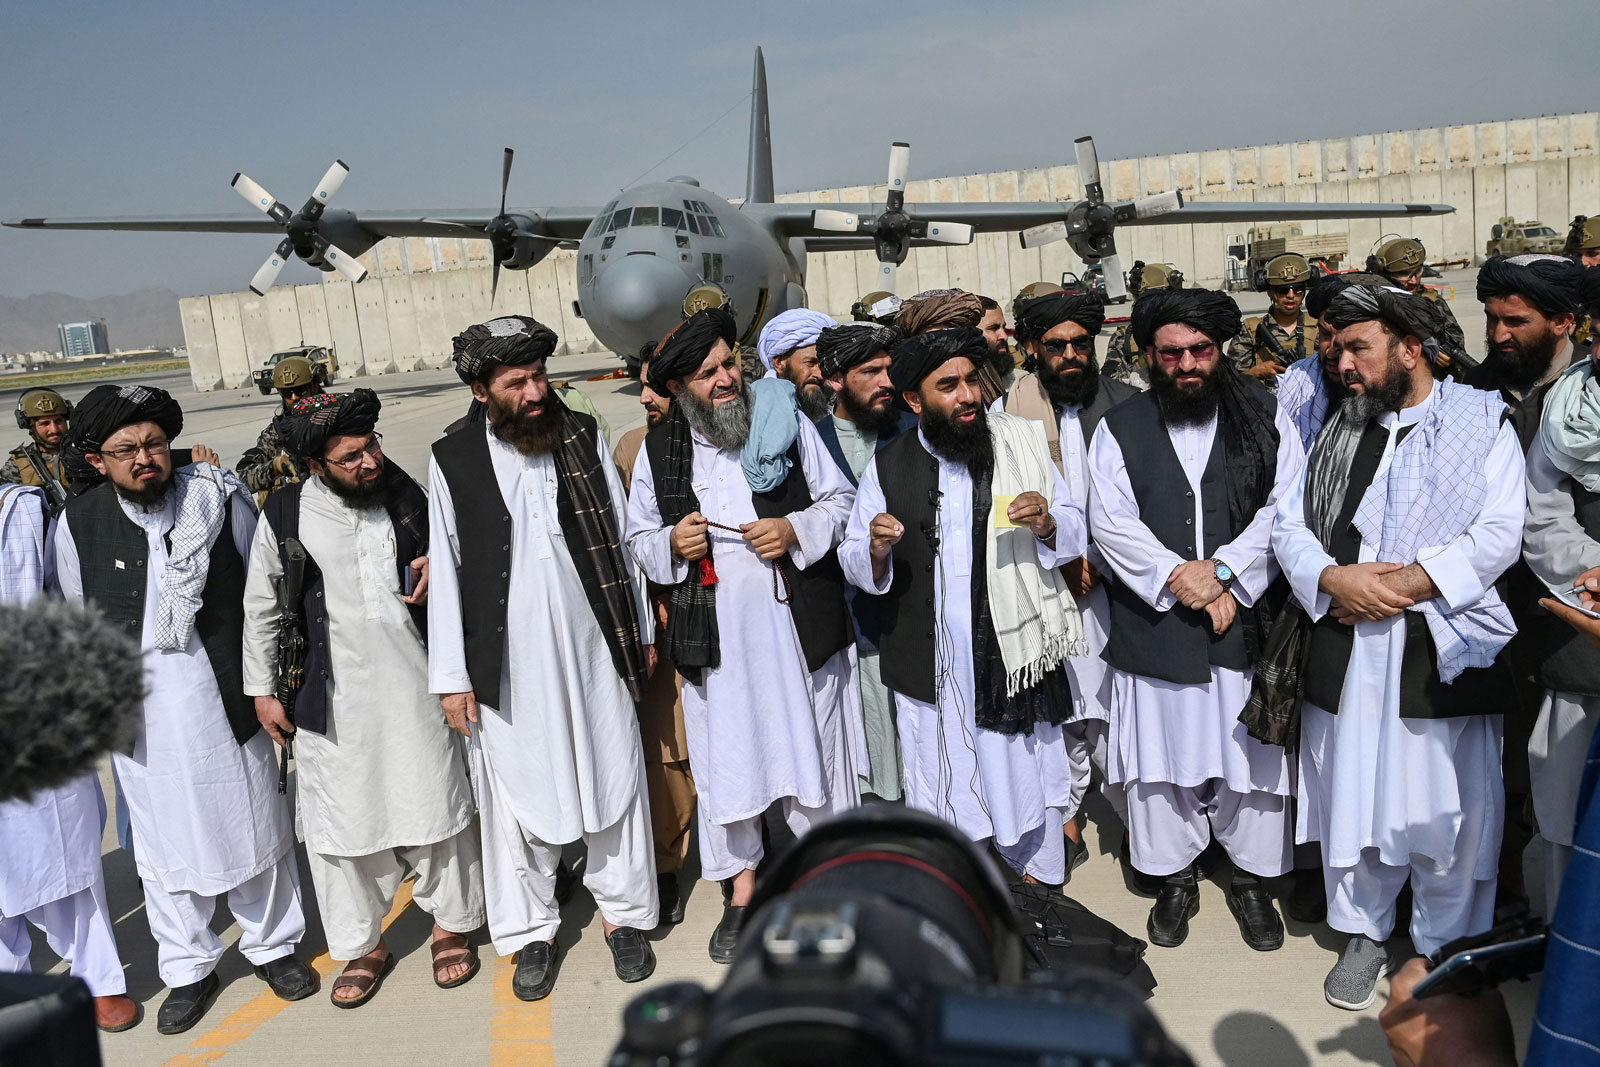 Taliban spokesman Zabihullah Mujahid, center, with shawl, speaks to the media at the airport in Kabul on August 31.